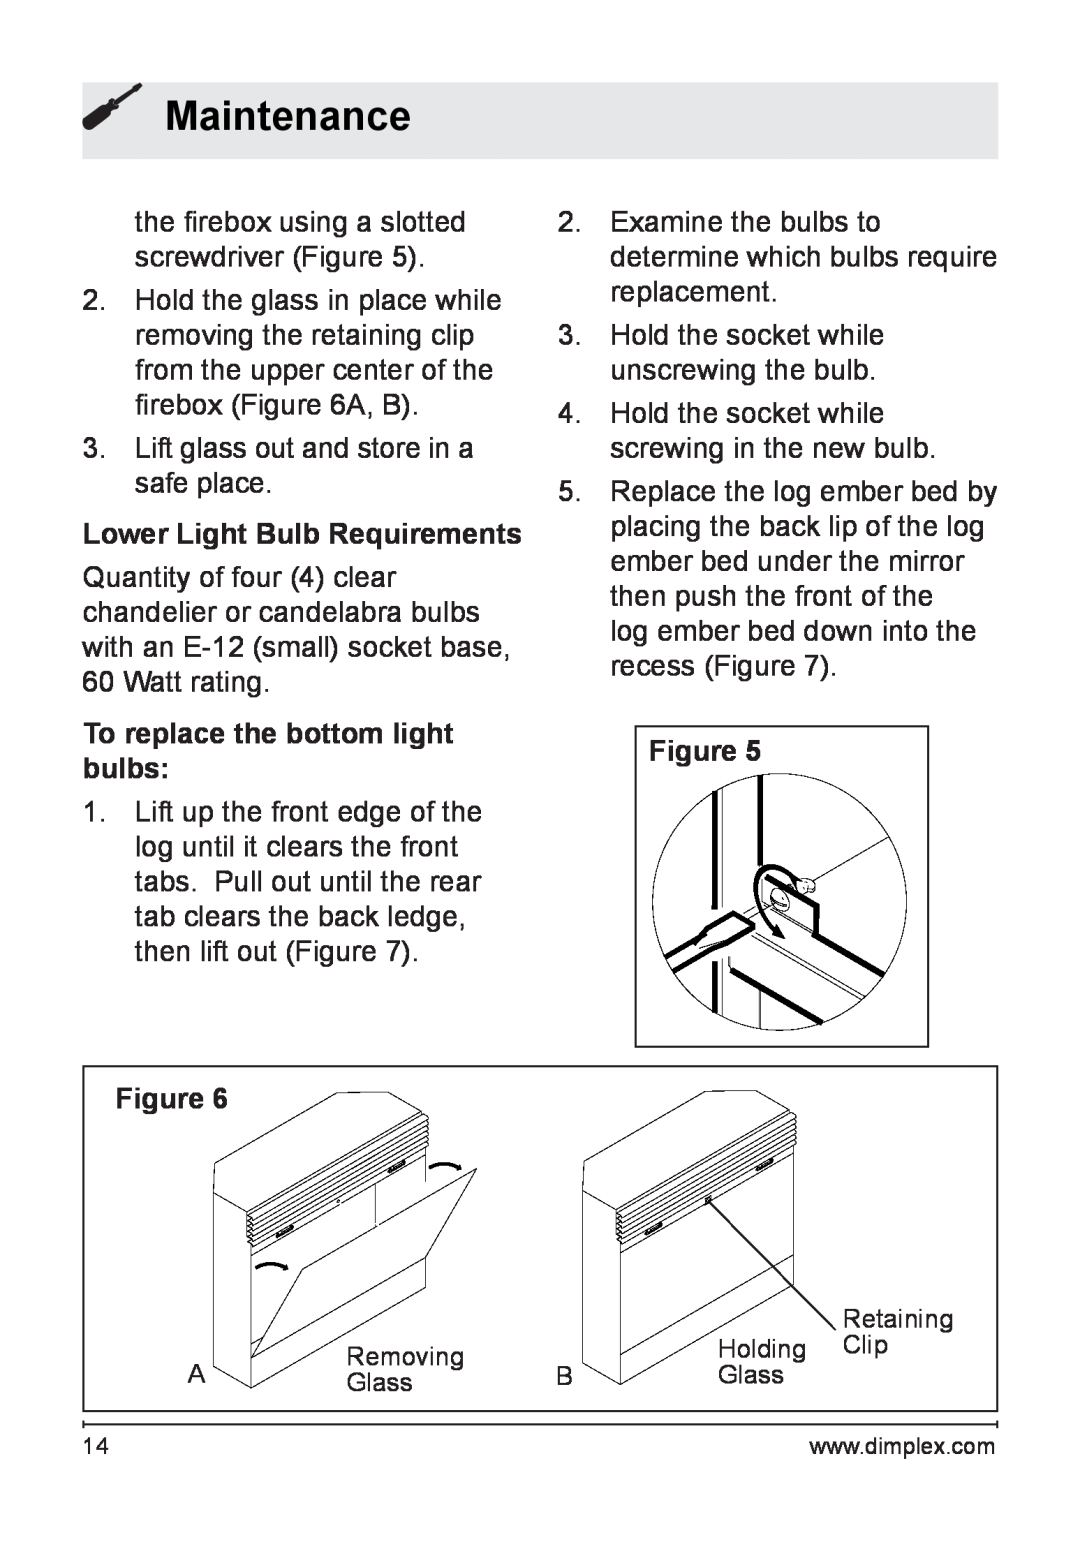 Dimplex DF3003 owner manual Maintenance, Lower Light Bulb Requirements, To replace the bottom light bulbs 